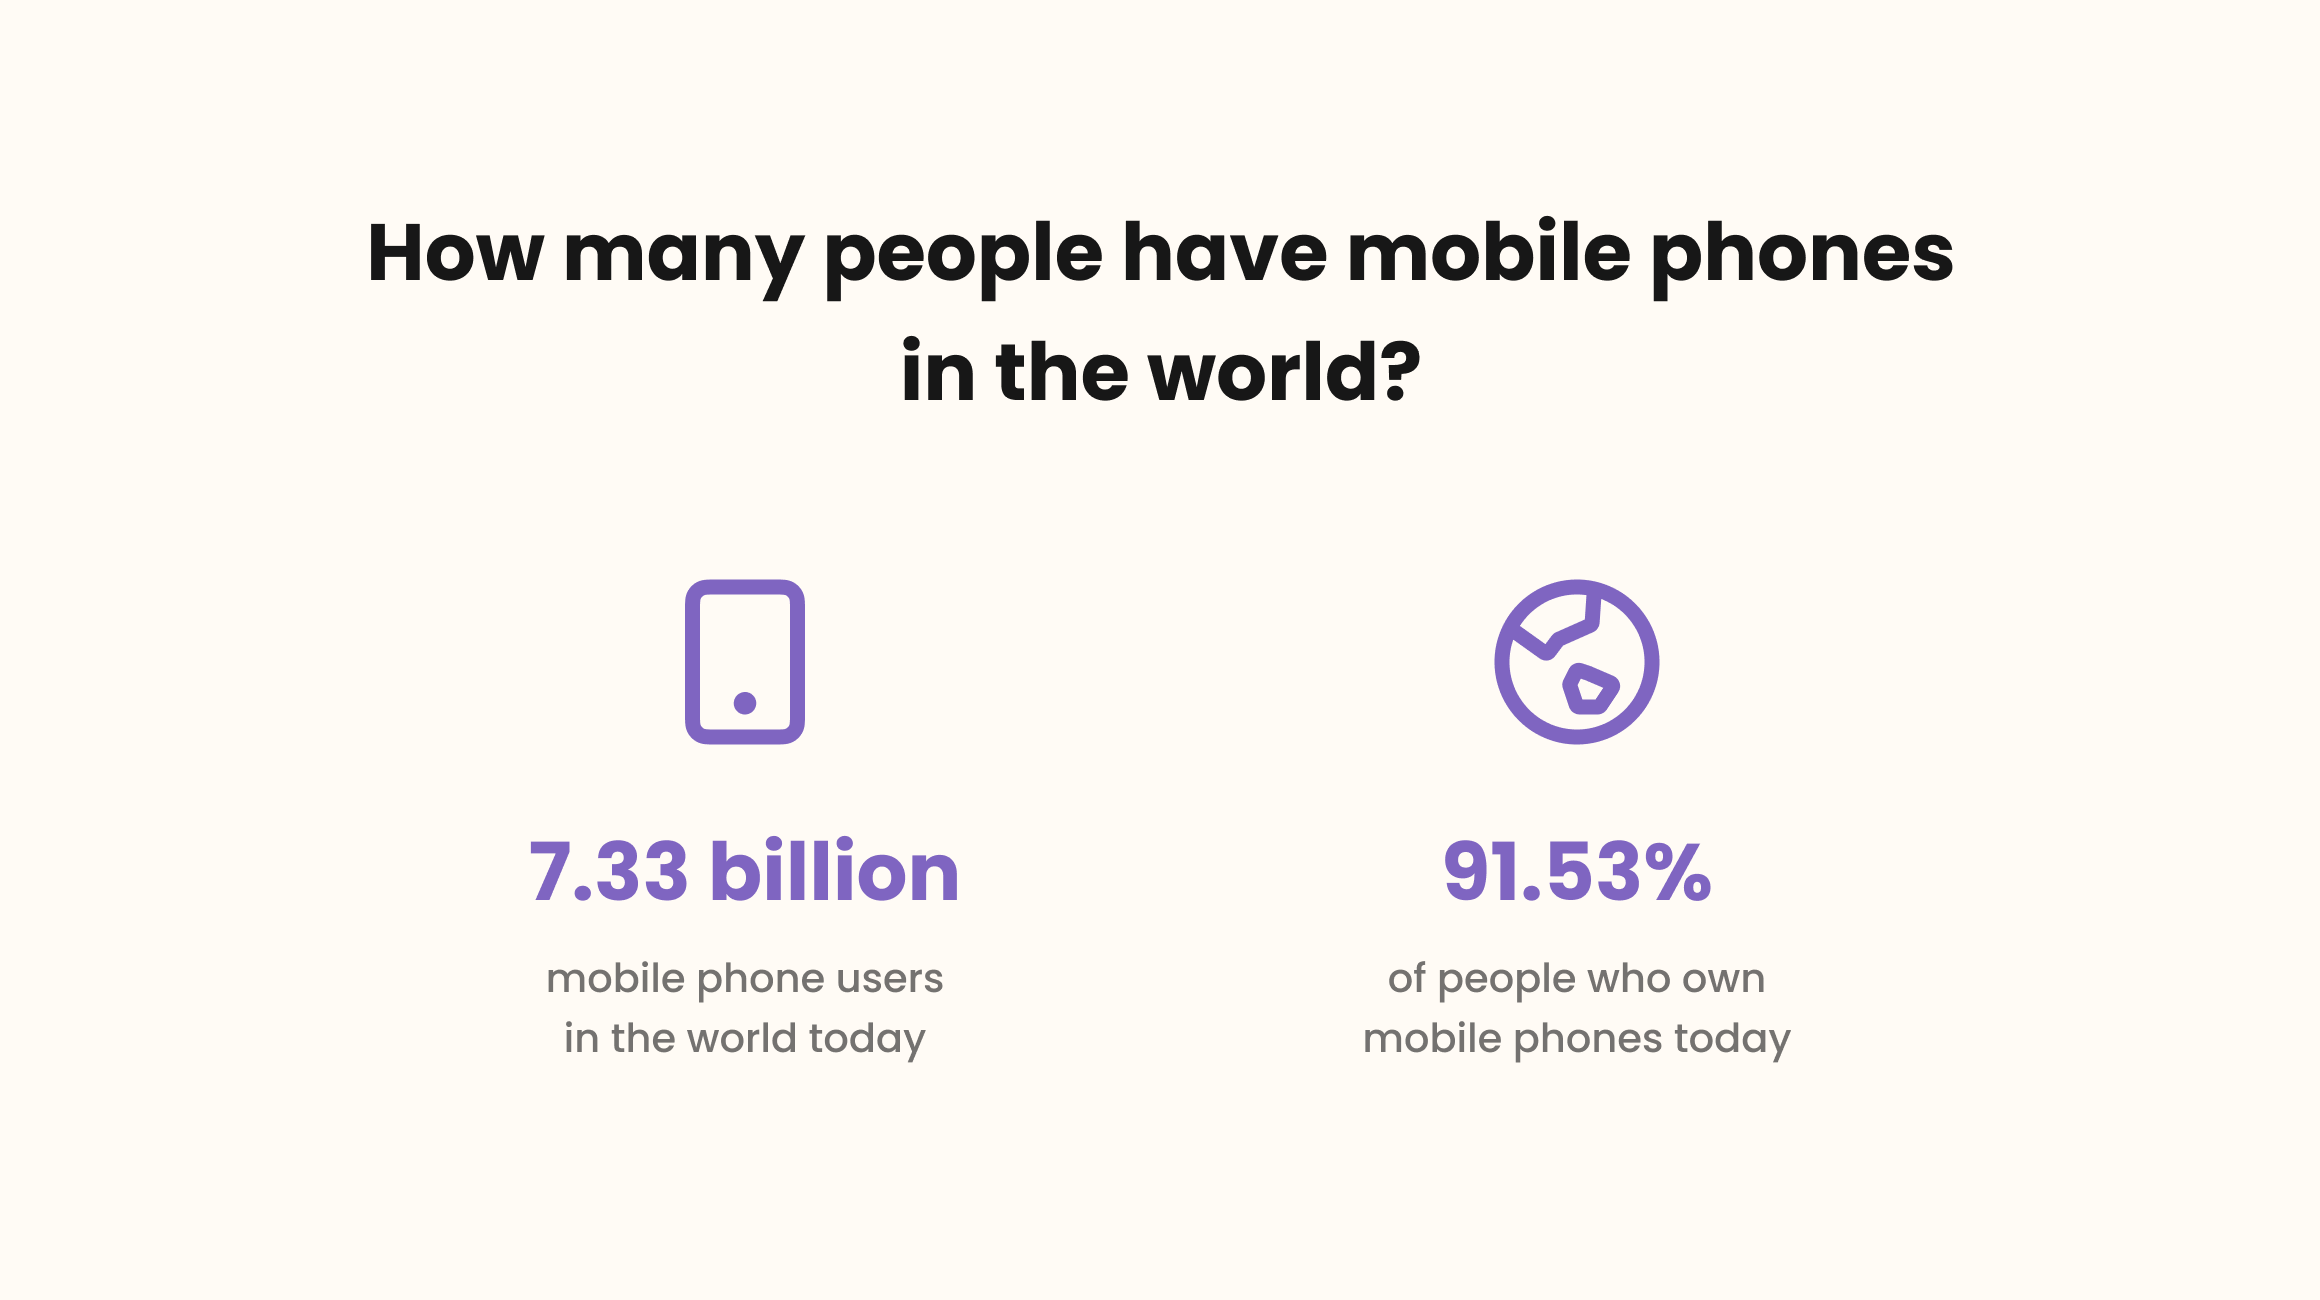 How many smartphone users are there